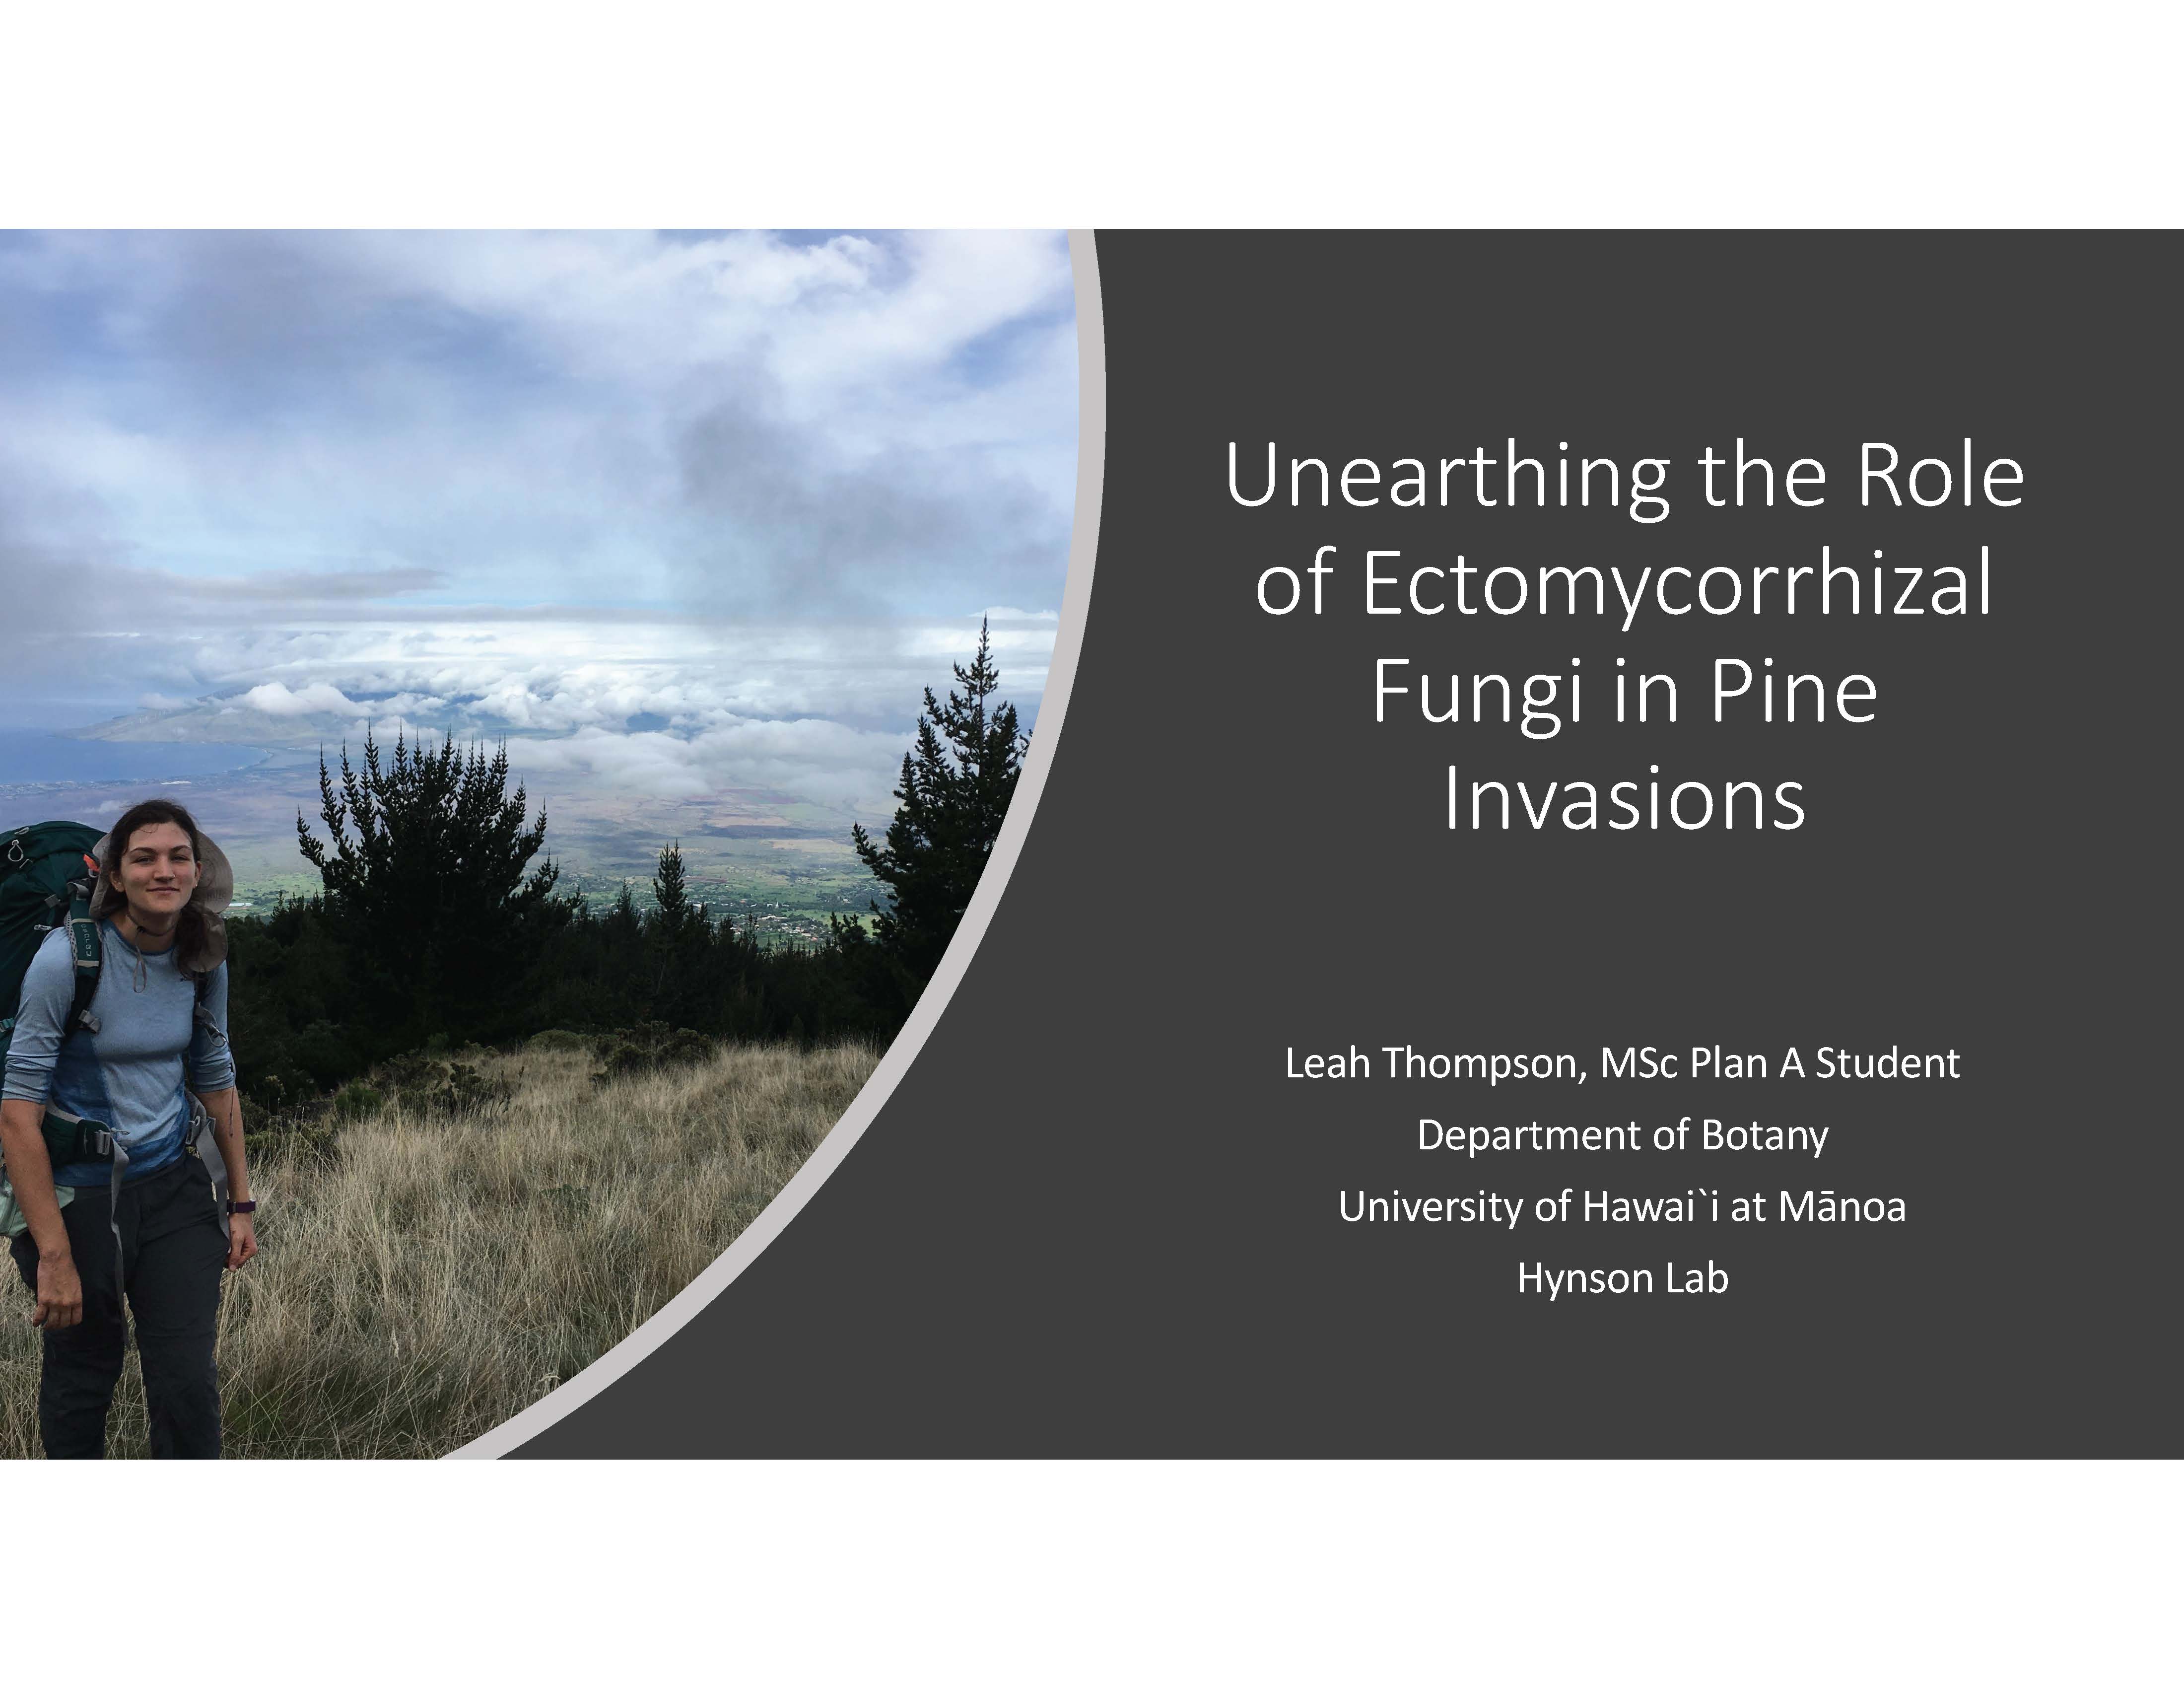 unearthing-the-role-of-ectomycorrhizal-fungi-in-pine-invasions-1